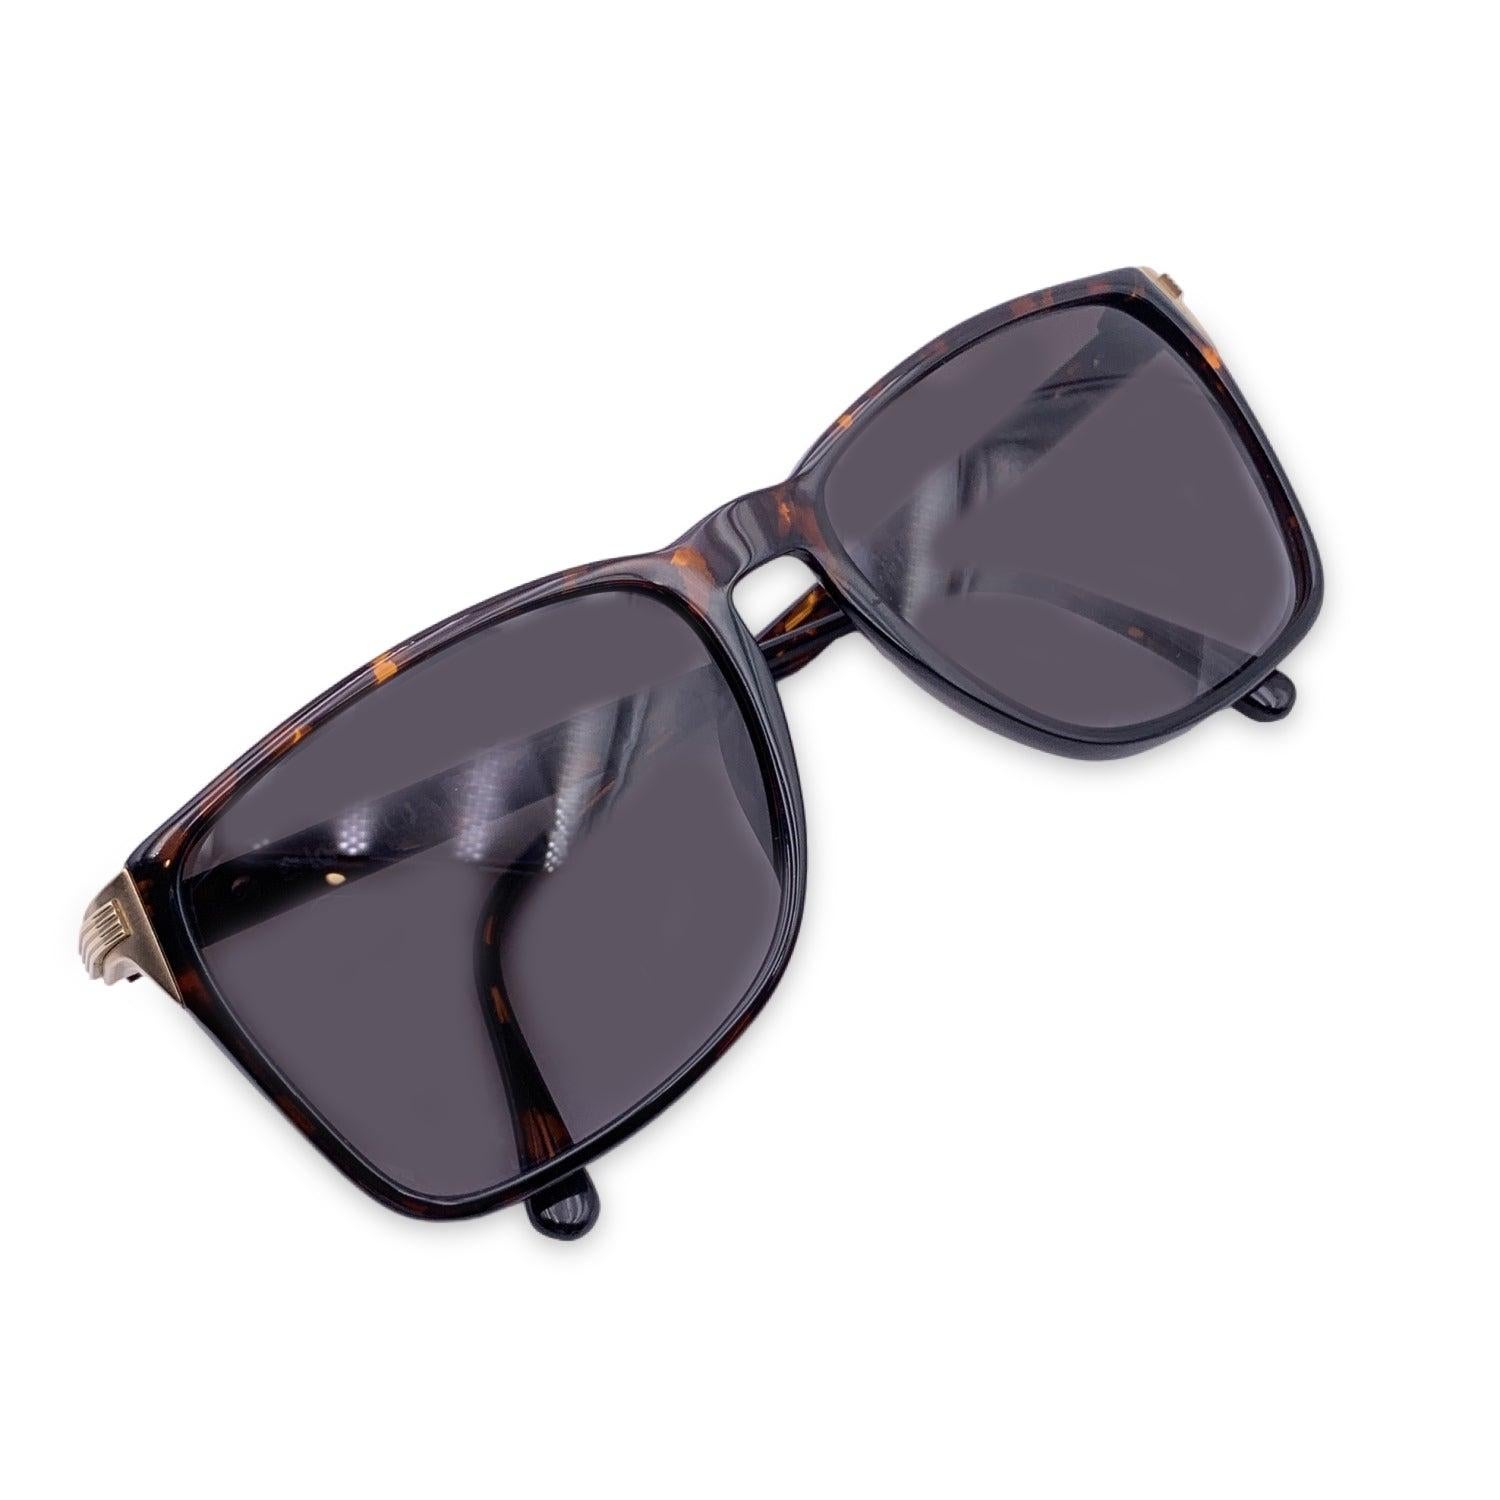 Vintage Christian Dior Unisex Sunglasses, Mod. 2483 10 Optyl. Size 57/16 140mm. Brown acetate Optyl frame. 100% Total UVA/UVB protection brown gradient lenses. CD logos on gold metal finish placed on the side of the temples. Details MATERIAL: